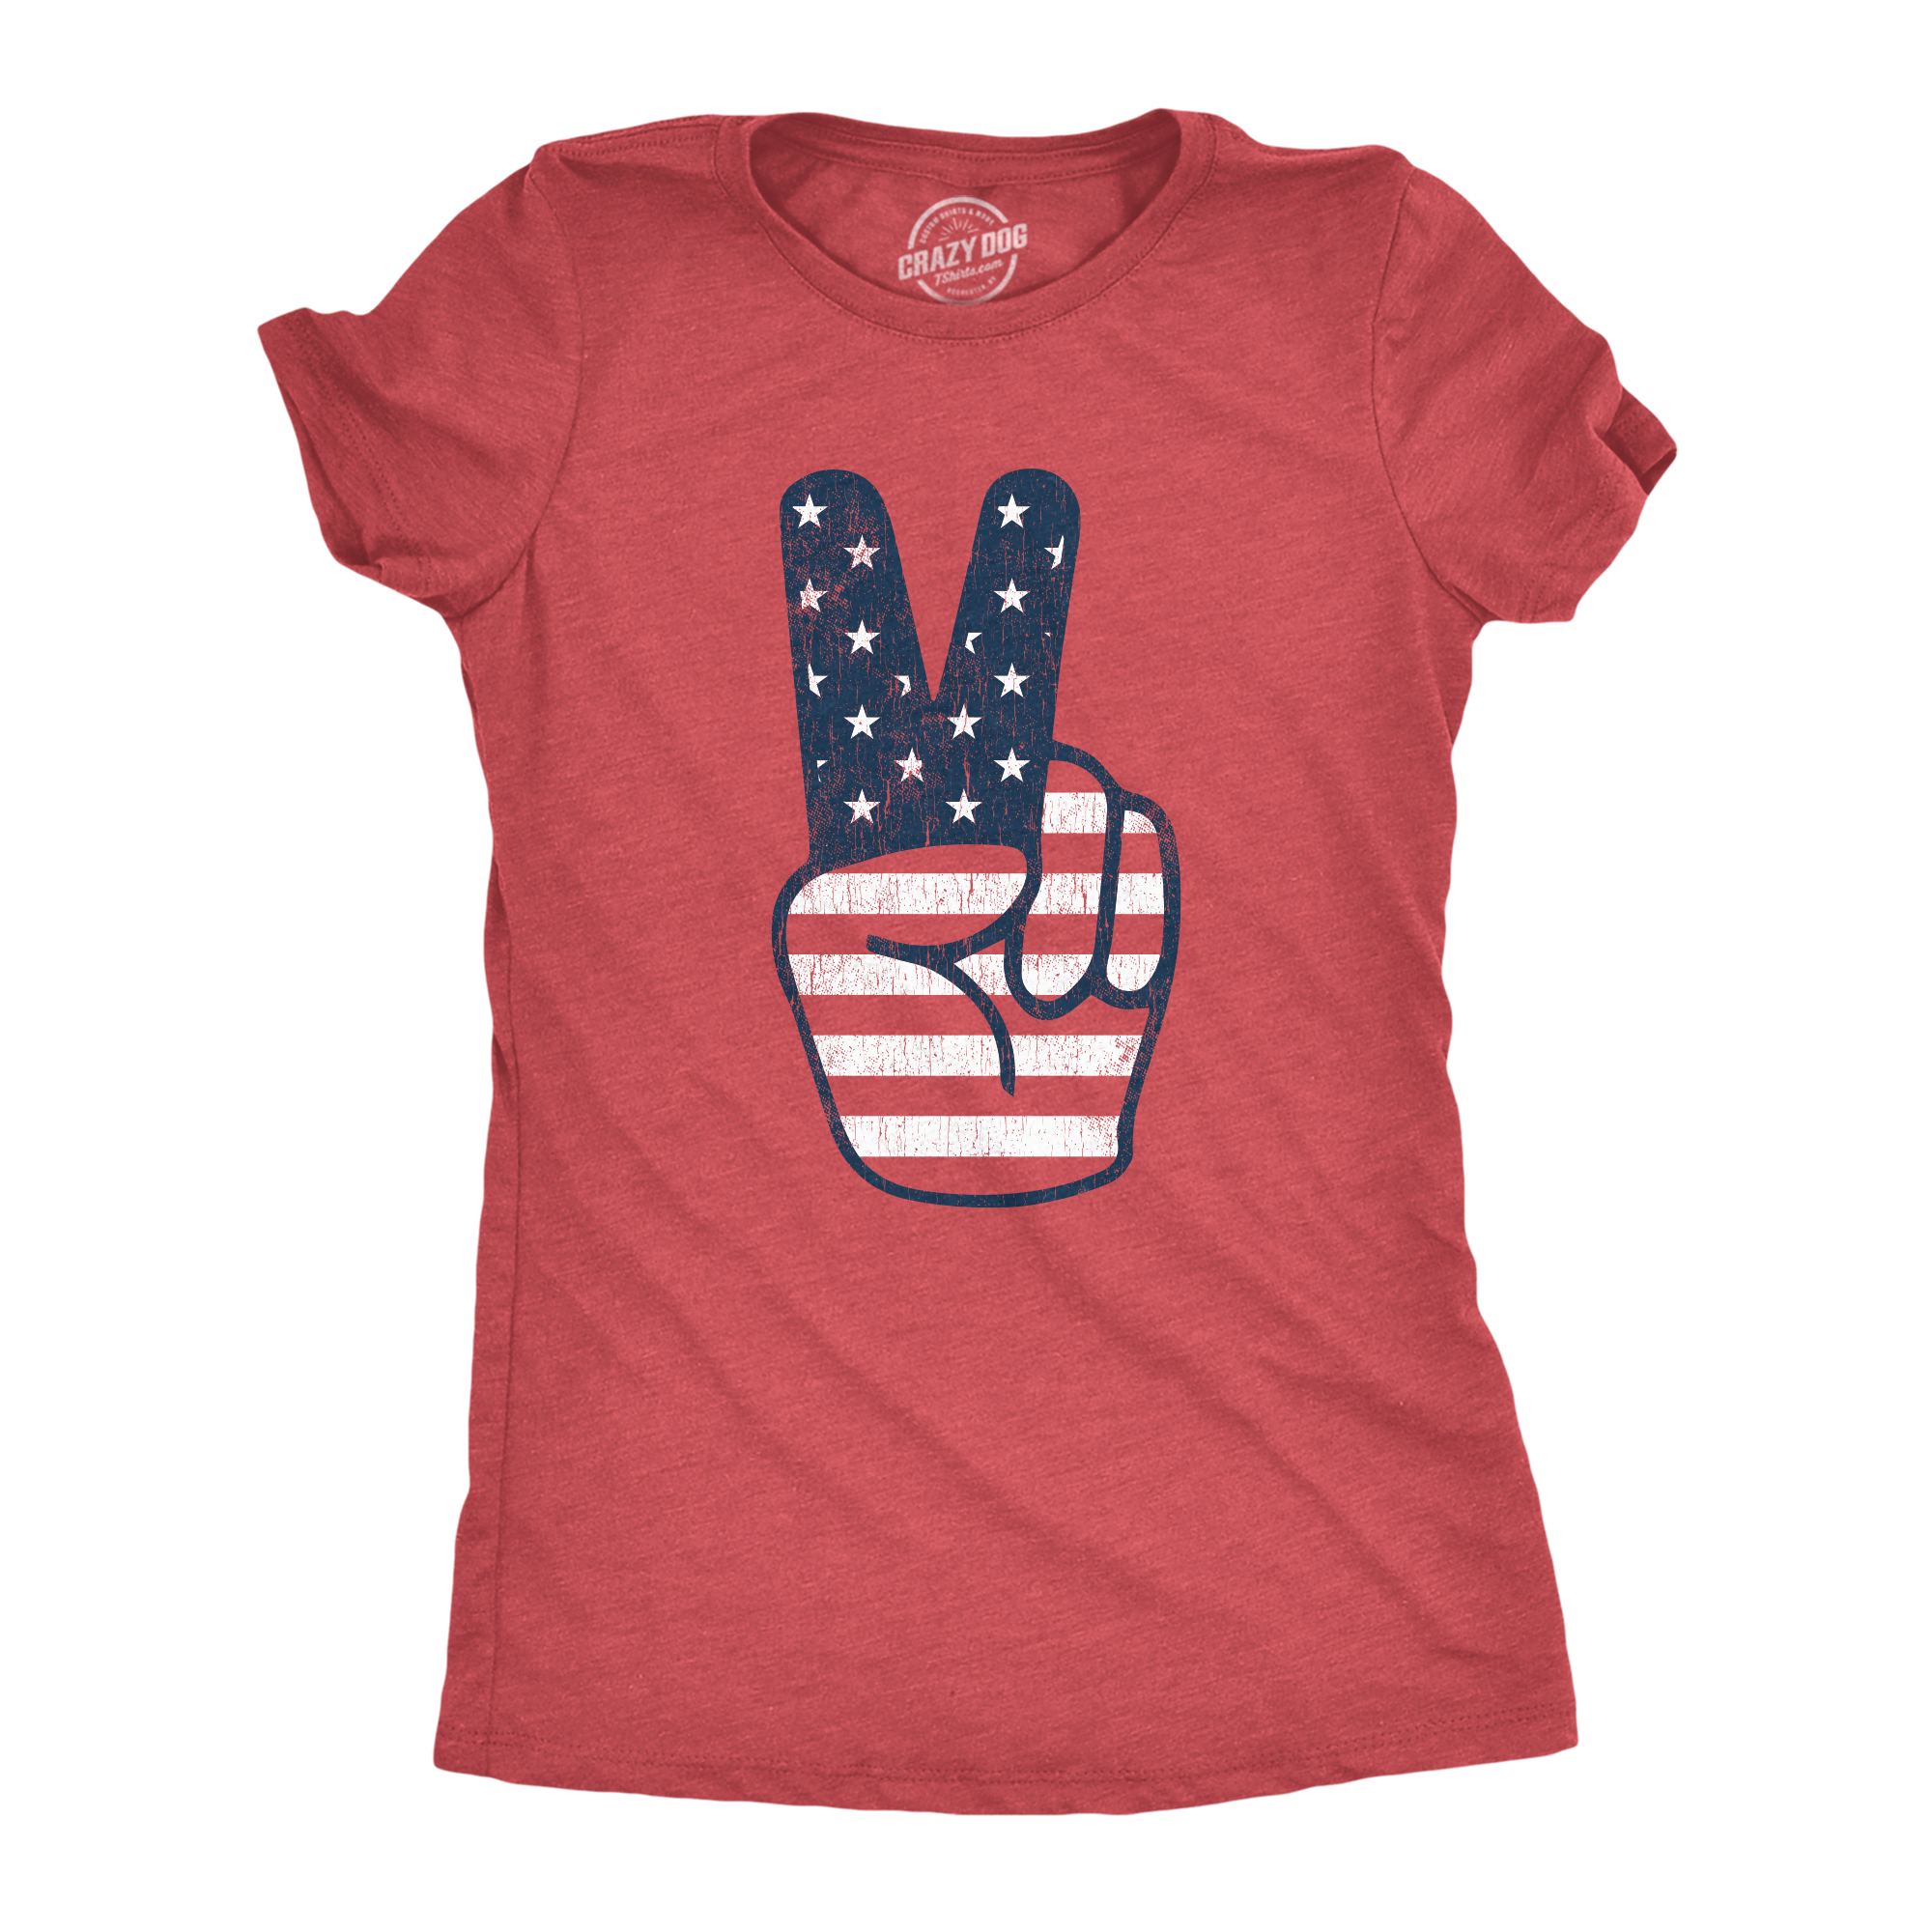 Crazy Dog Tshirts Womens Peace Sign American Flag Tshirt 4th Of July USA Patriotic Party Graphic Tee